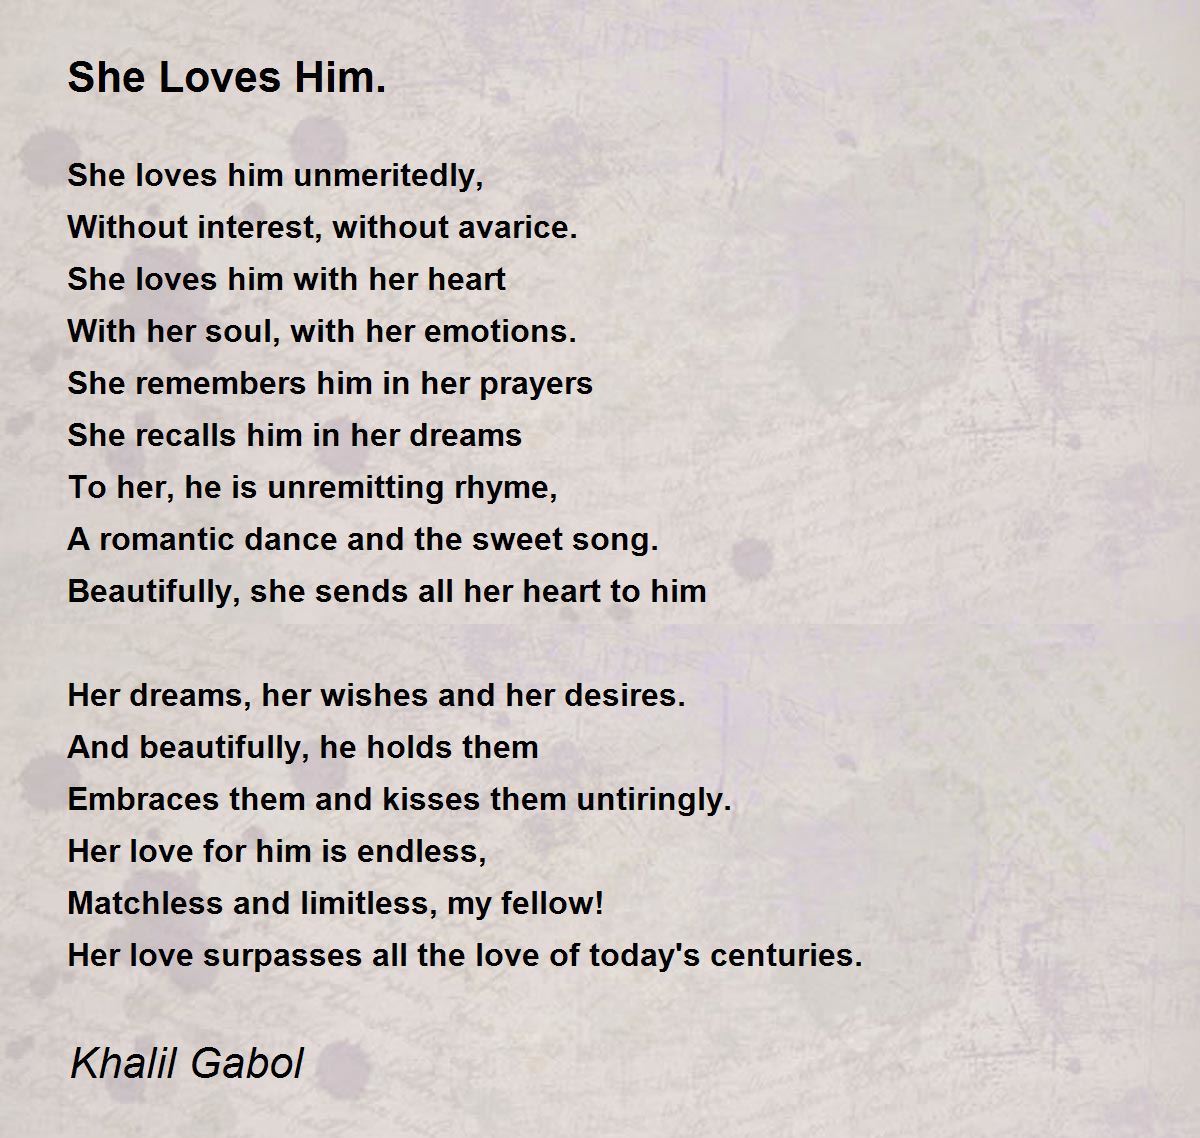 love poems for her that rhyme